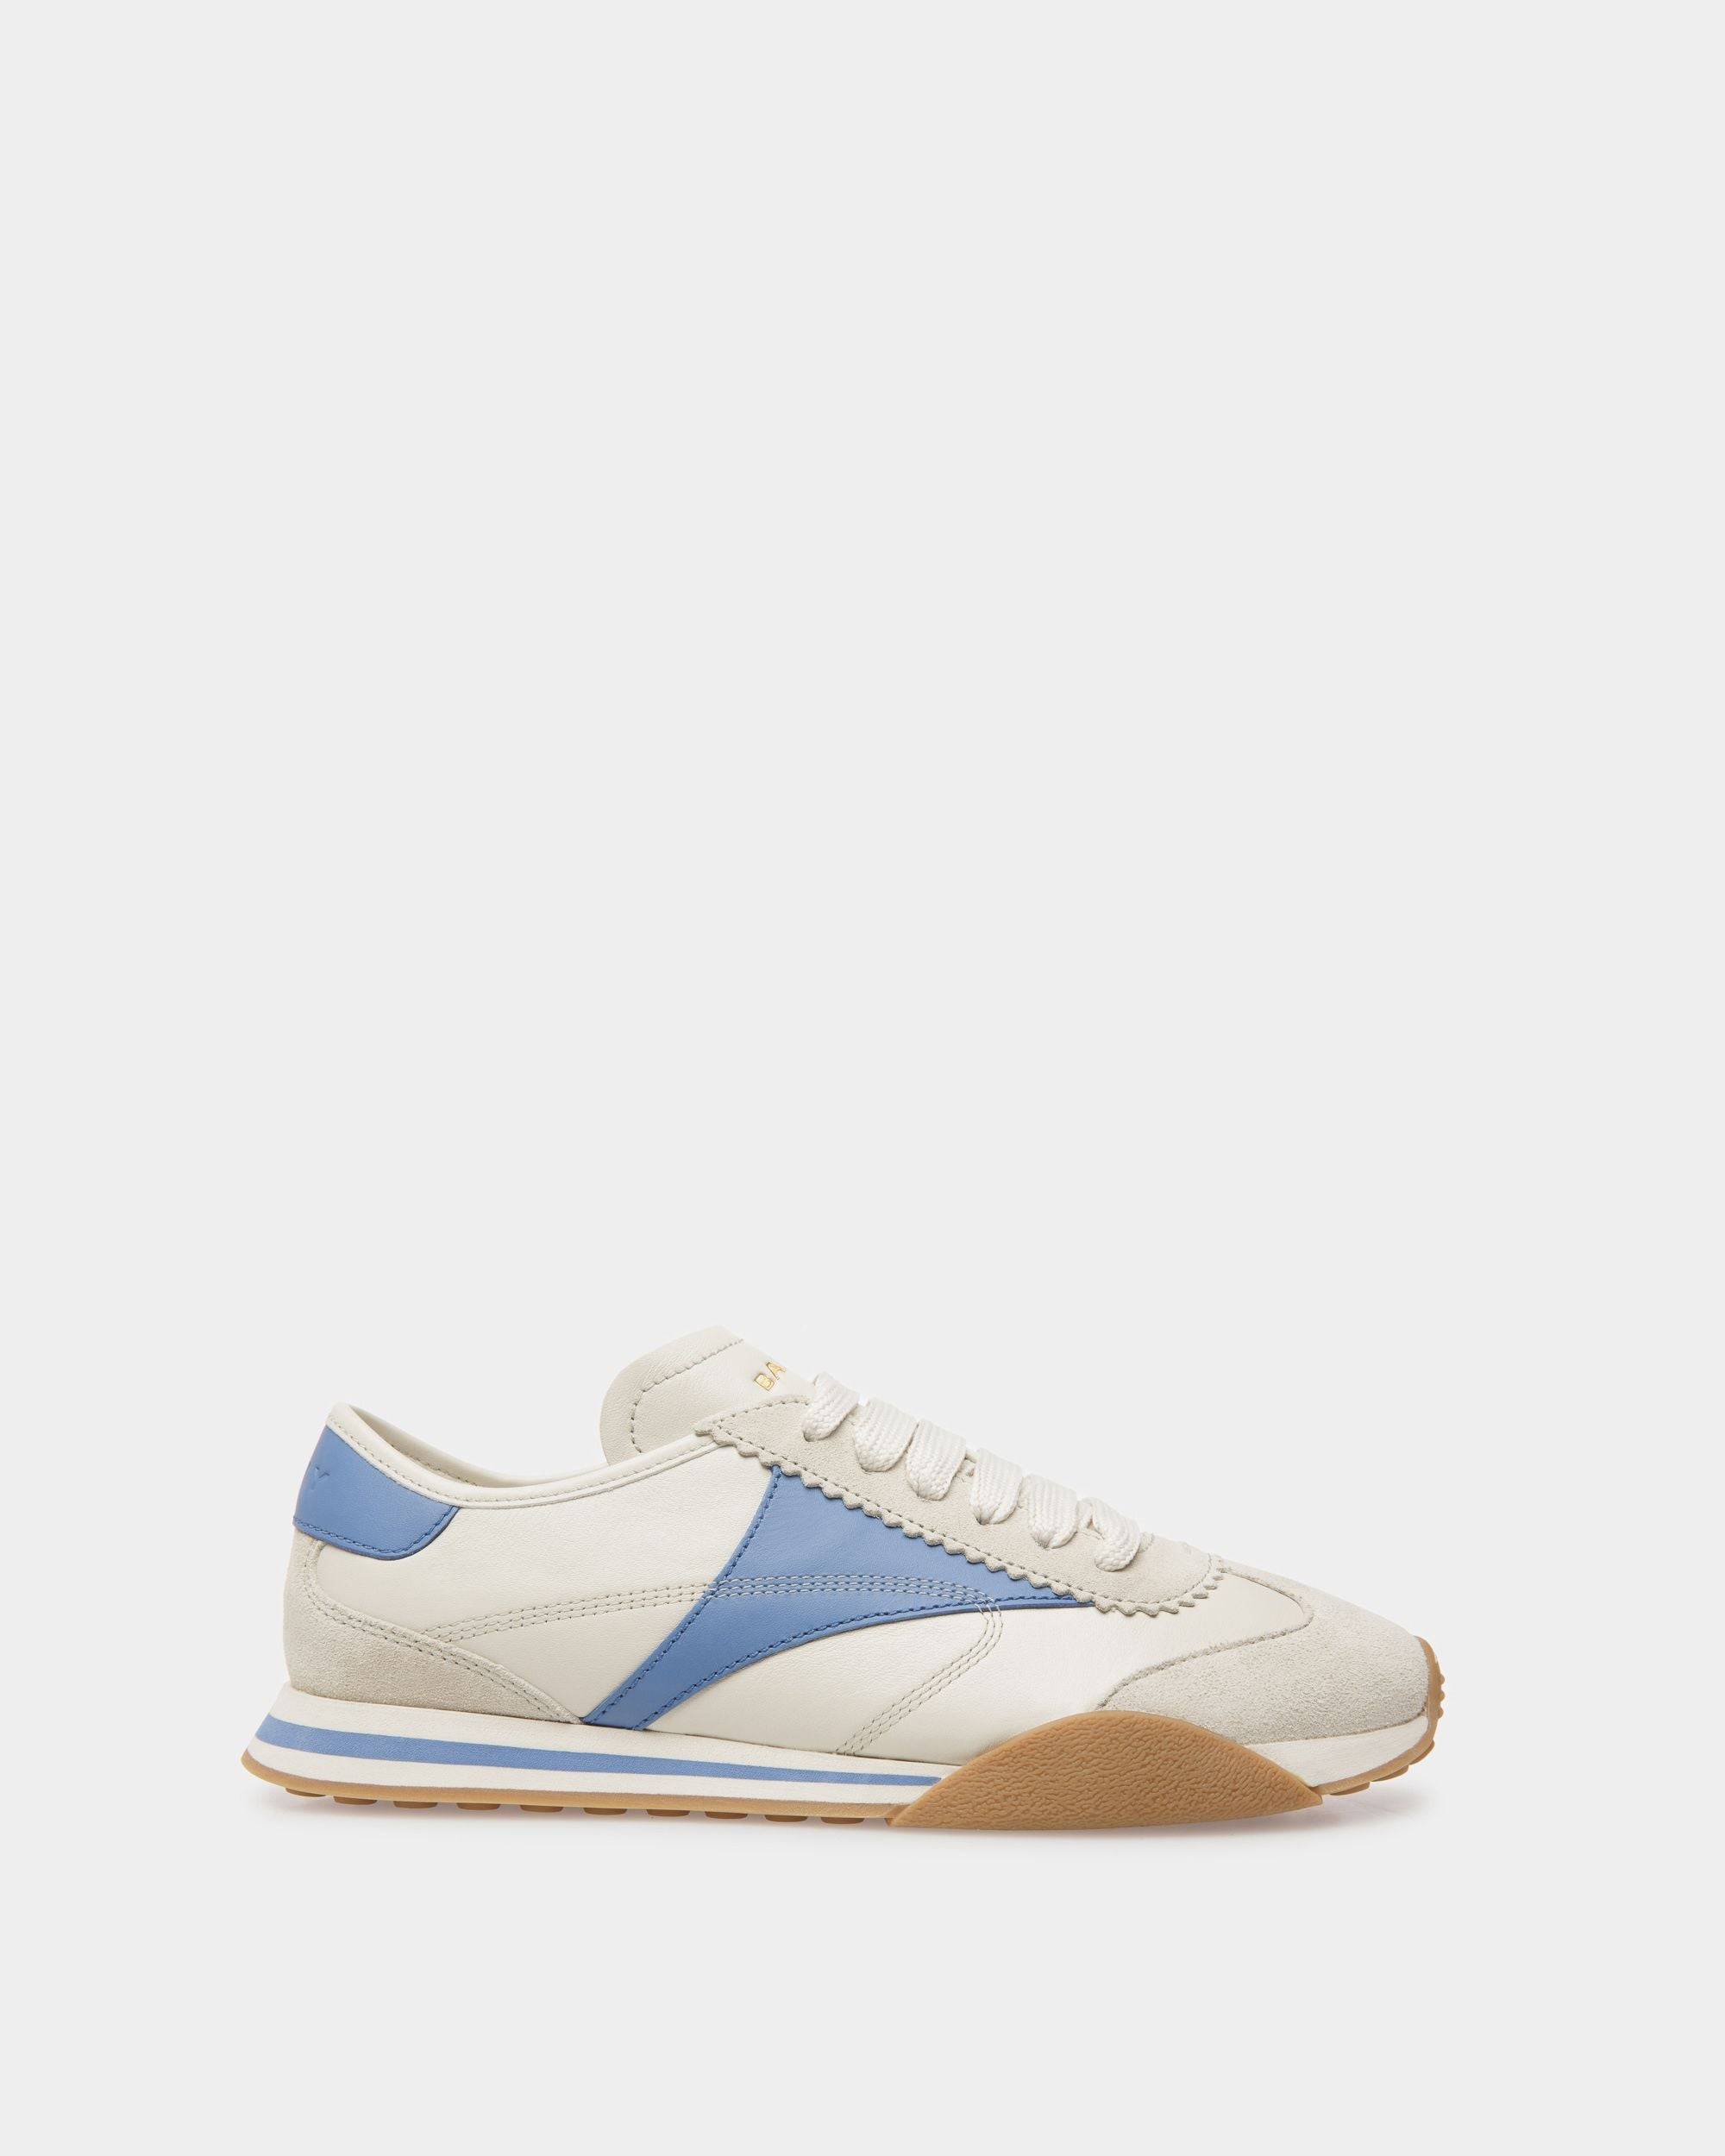 Women's Sussex Sneakers In Dusty White And Blue Leather | Bally | Still Life Side